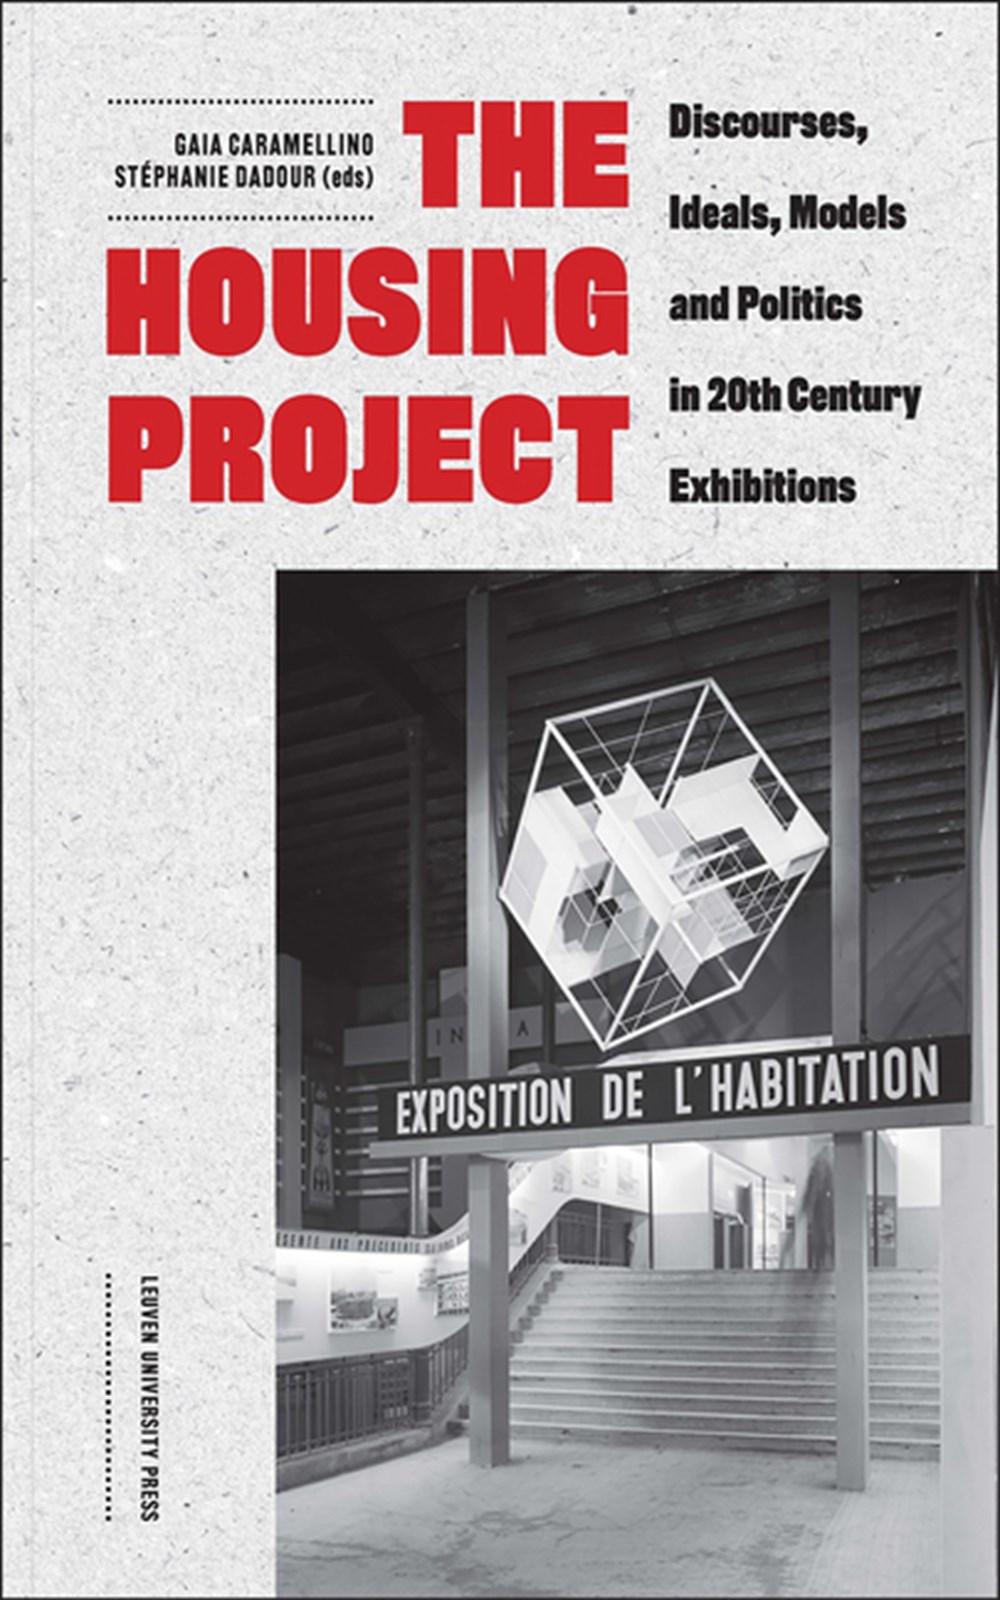 Housing Project: Discourses, Ideals, Models, and Politics in 20th-Century Exhibitions